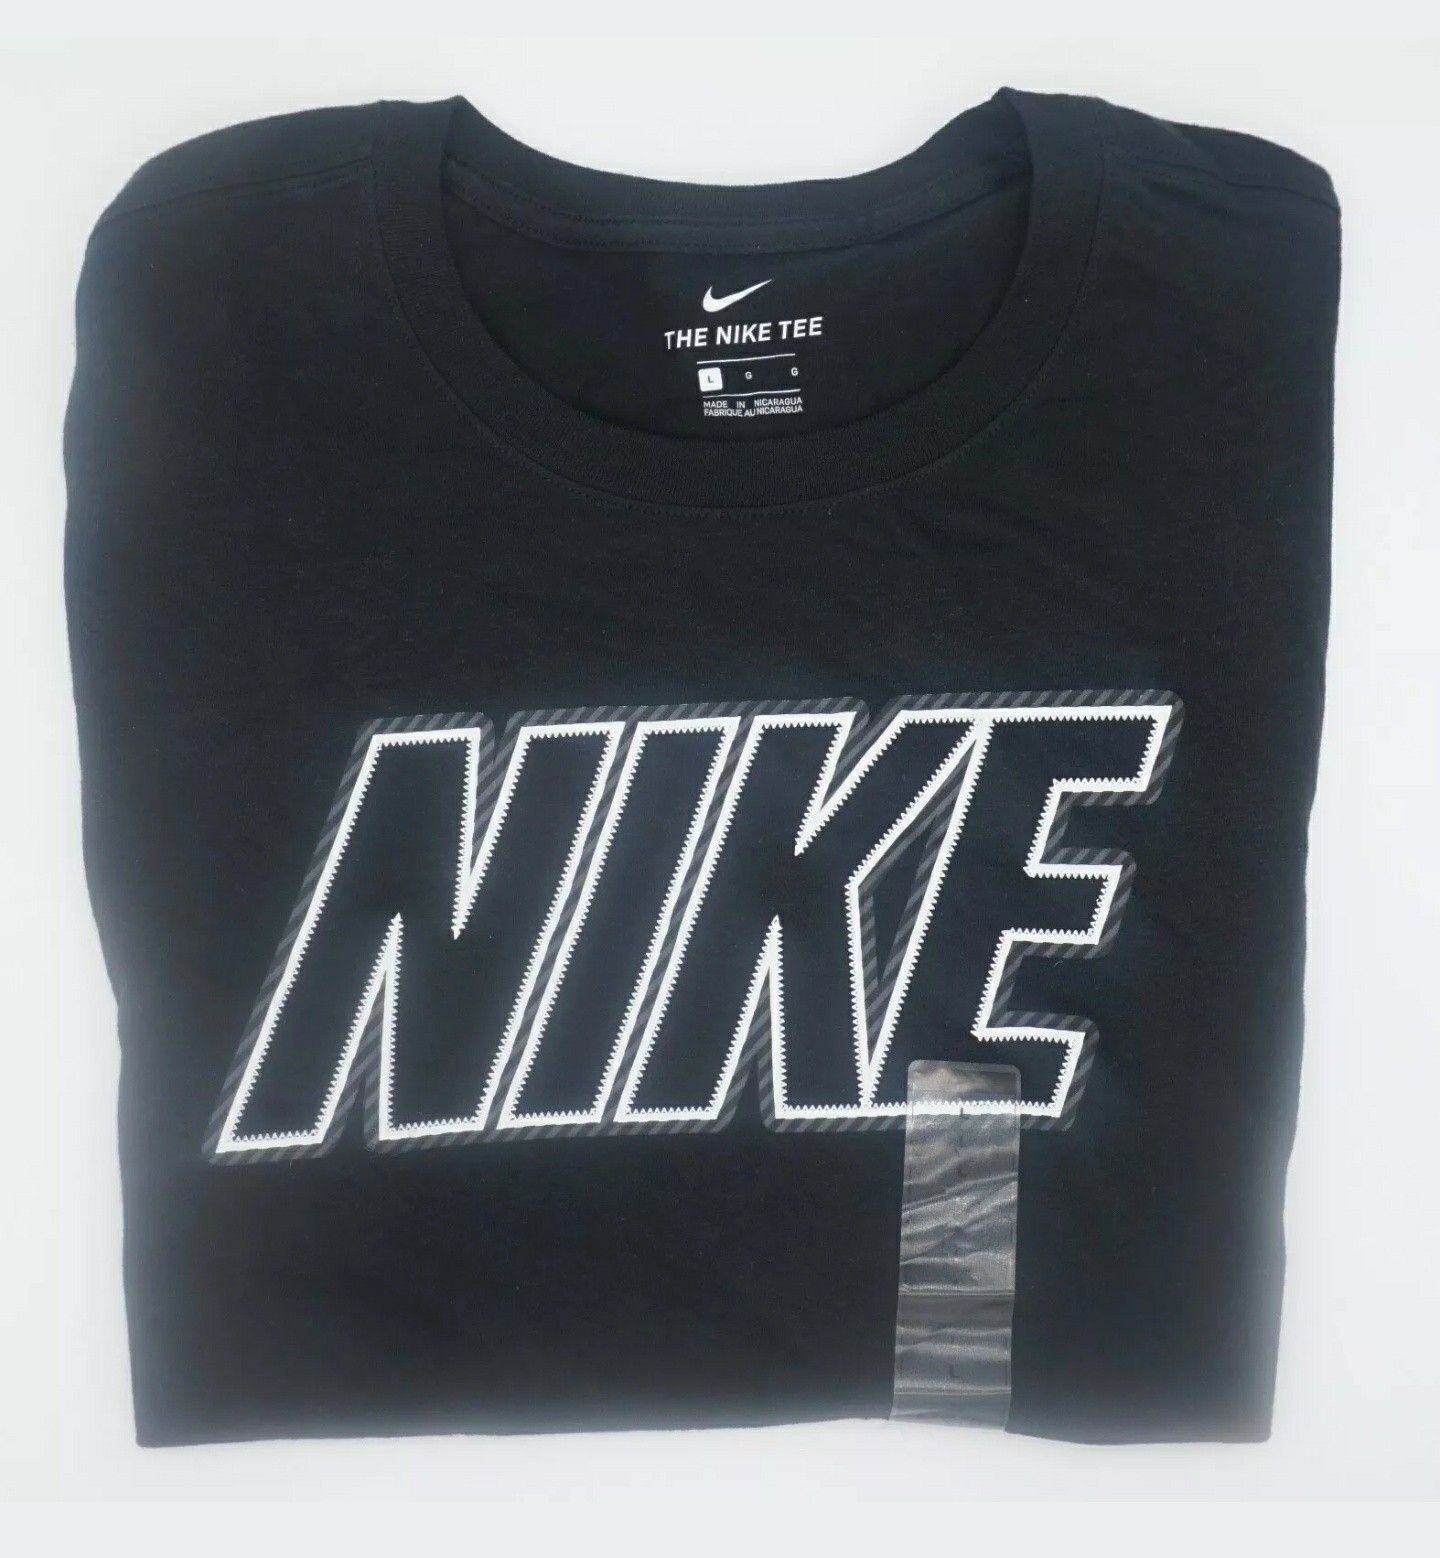 Brand new authentic Nike t shirts men size small and large